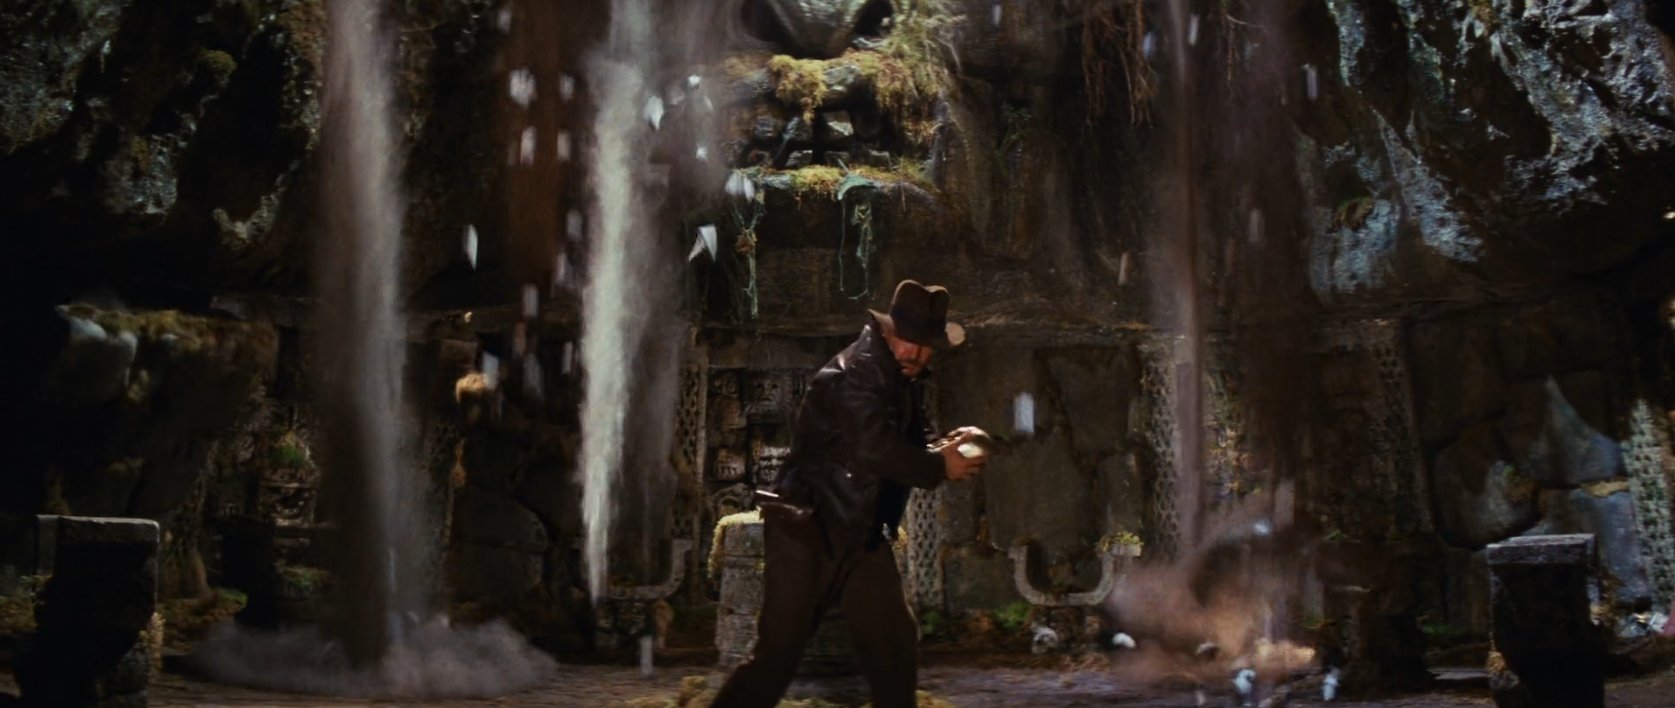 Indiana Jones and the Raiders of the Lost Ark - Temple collapses